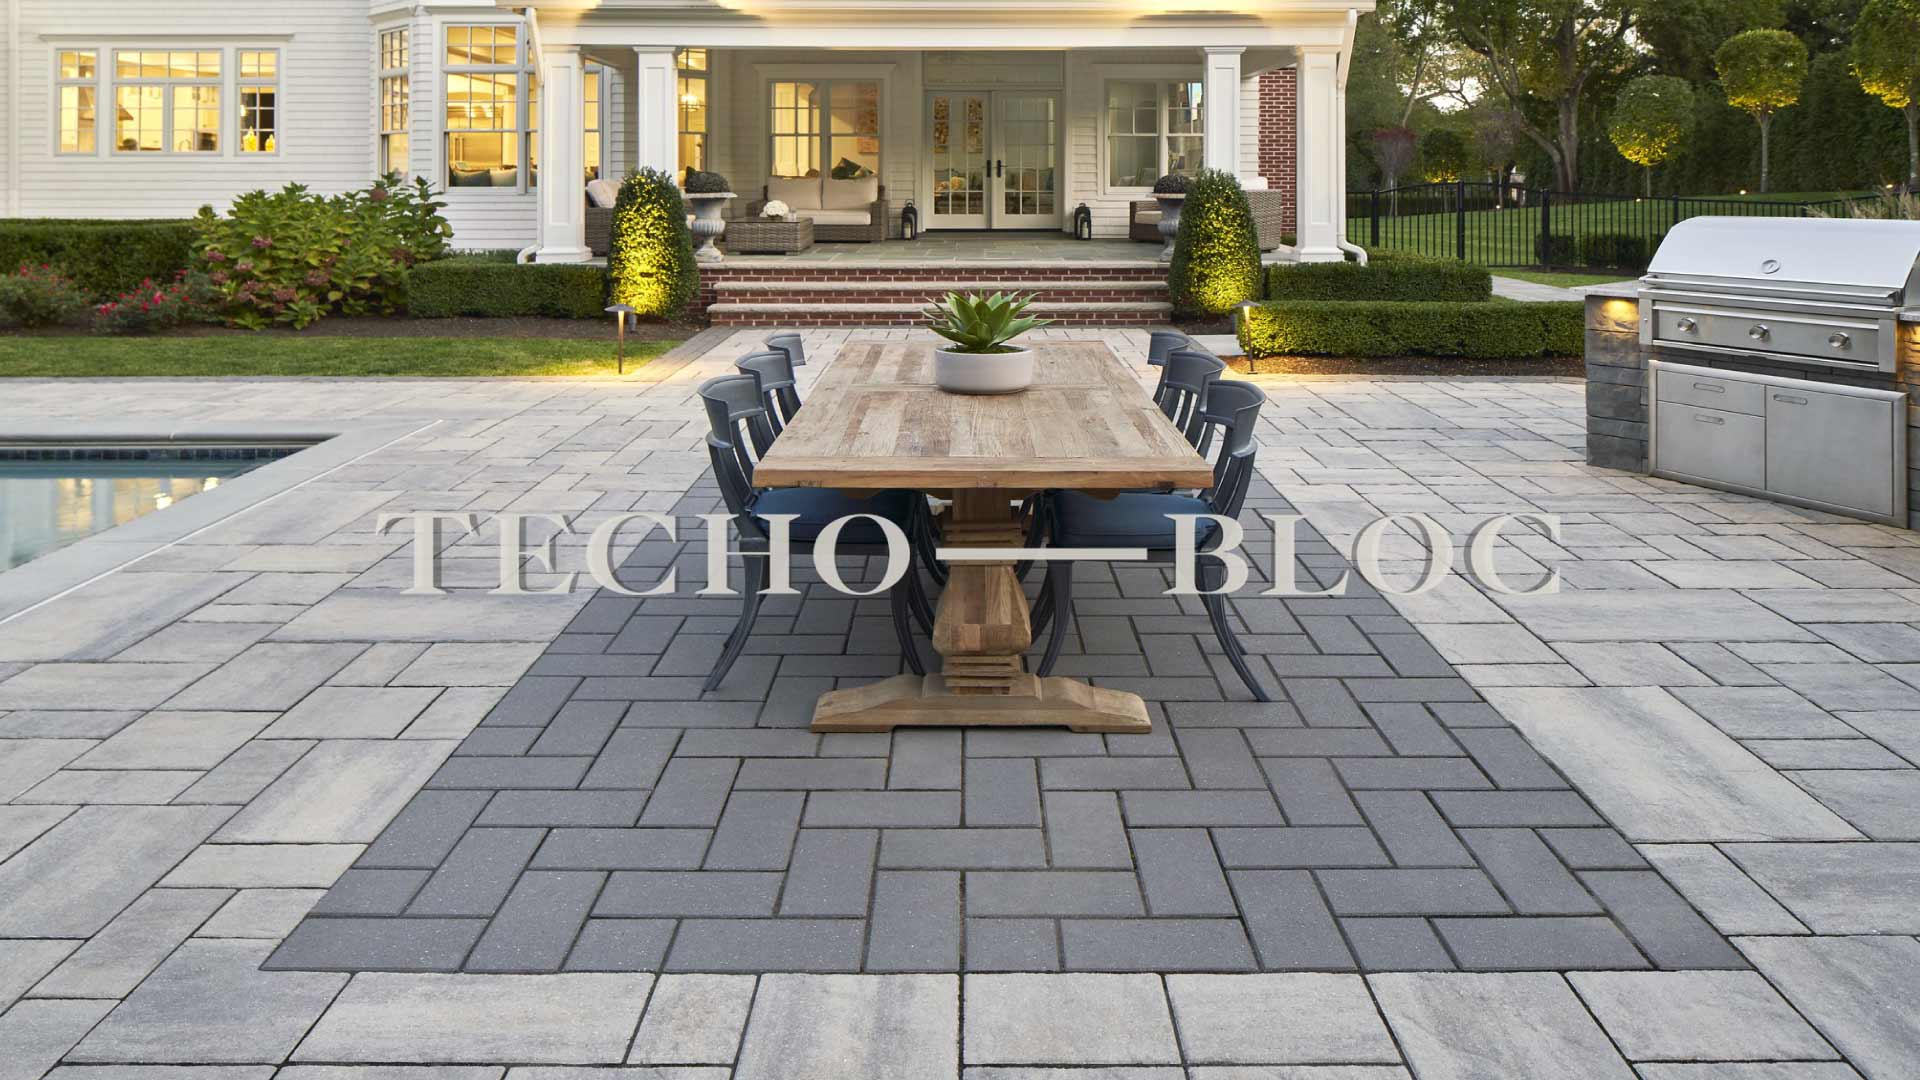 Landscape Paver Patio Trends in the 2020s